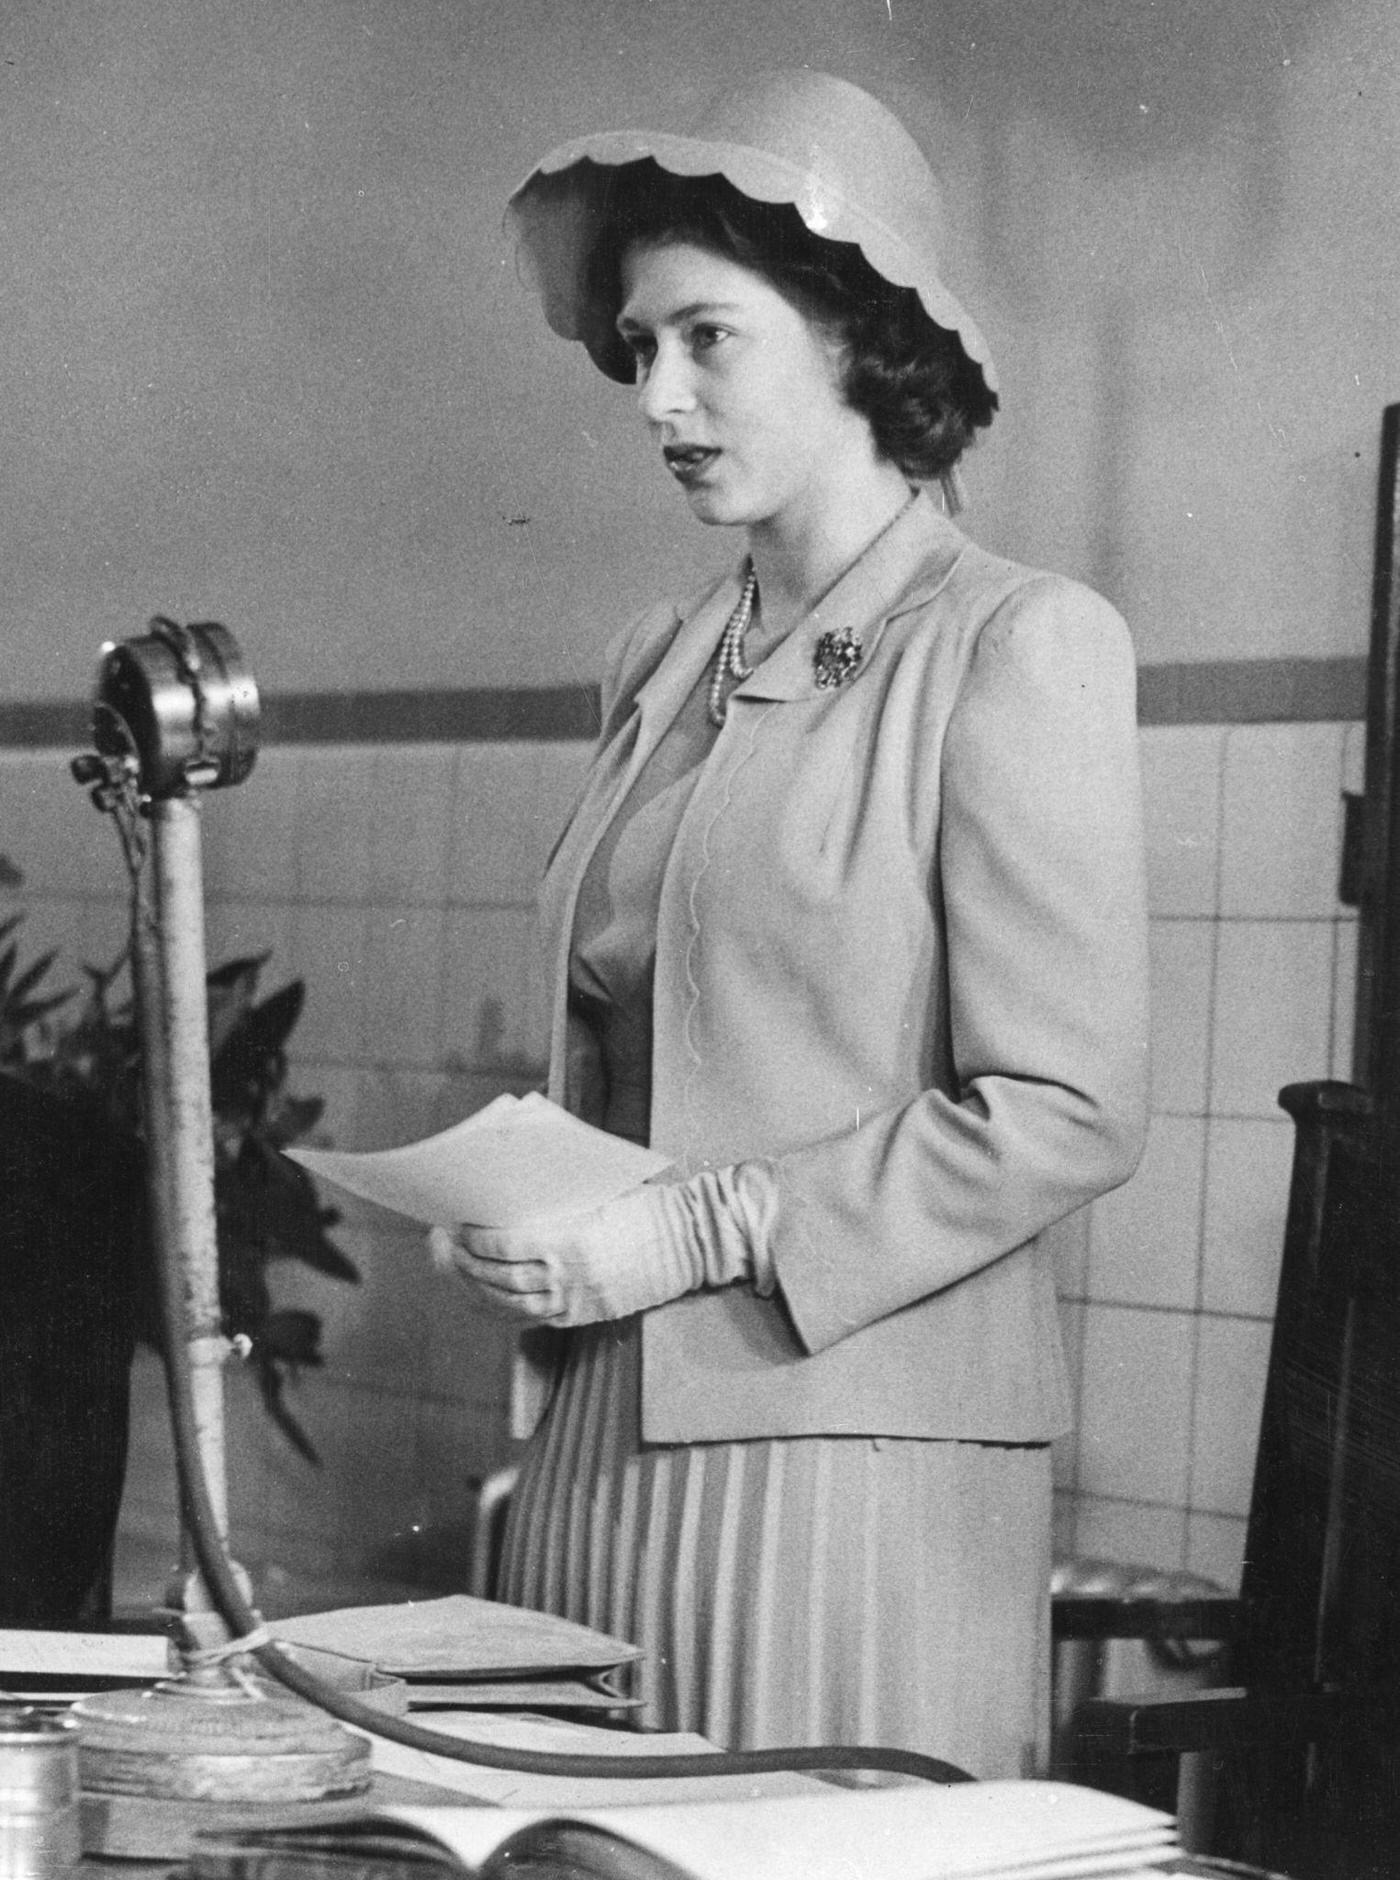 Princess Elizabeth addressing the Governors Court at the Queen Elizabeth Hospital for Children as their President, her first solo engagement, 1944